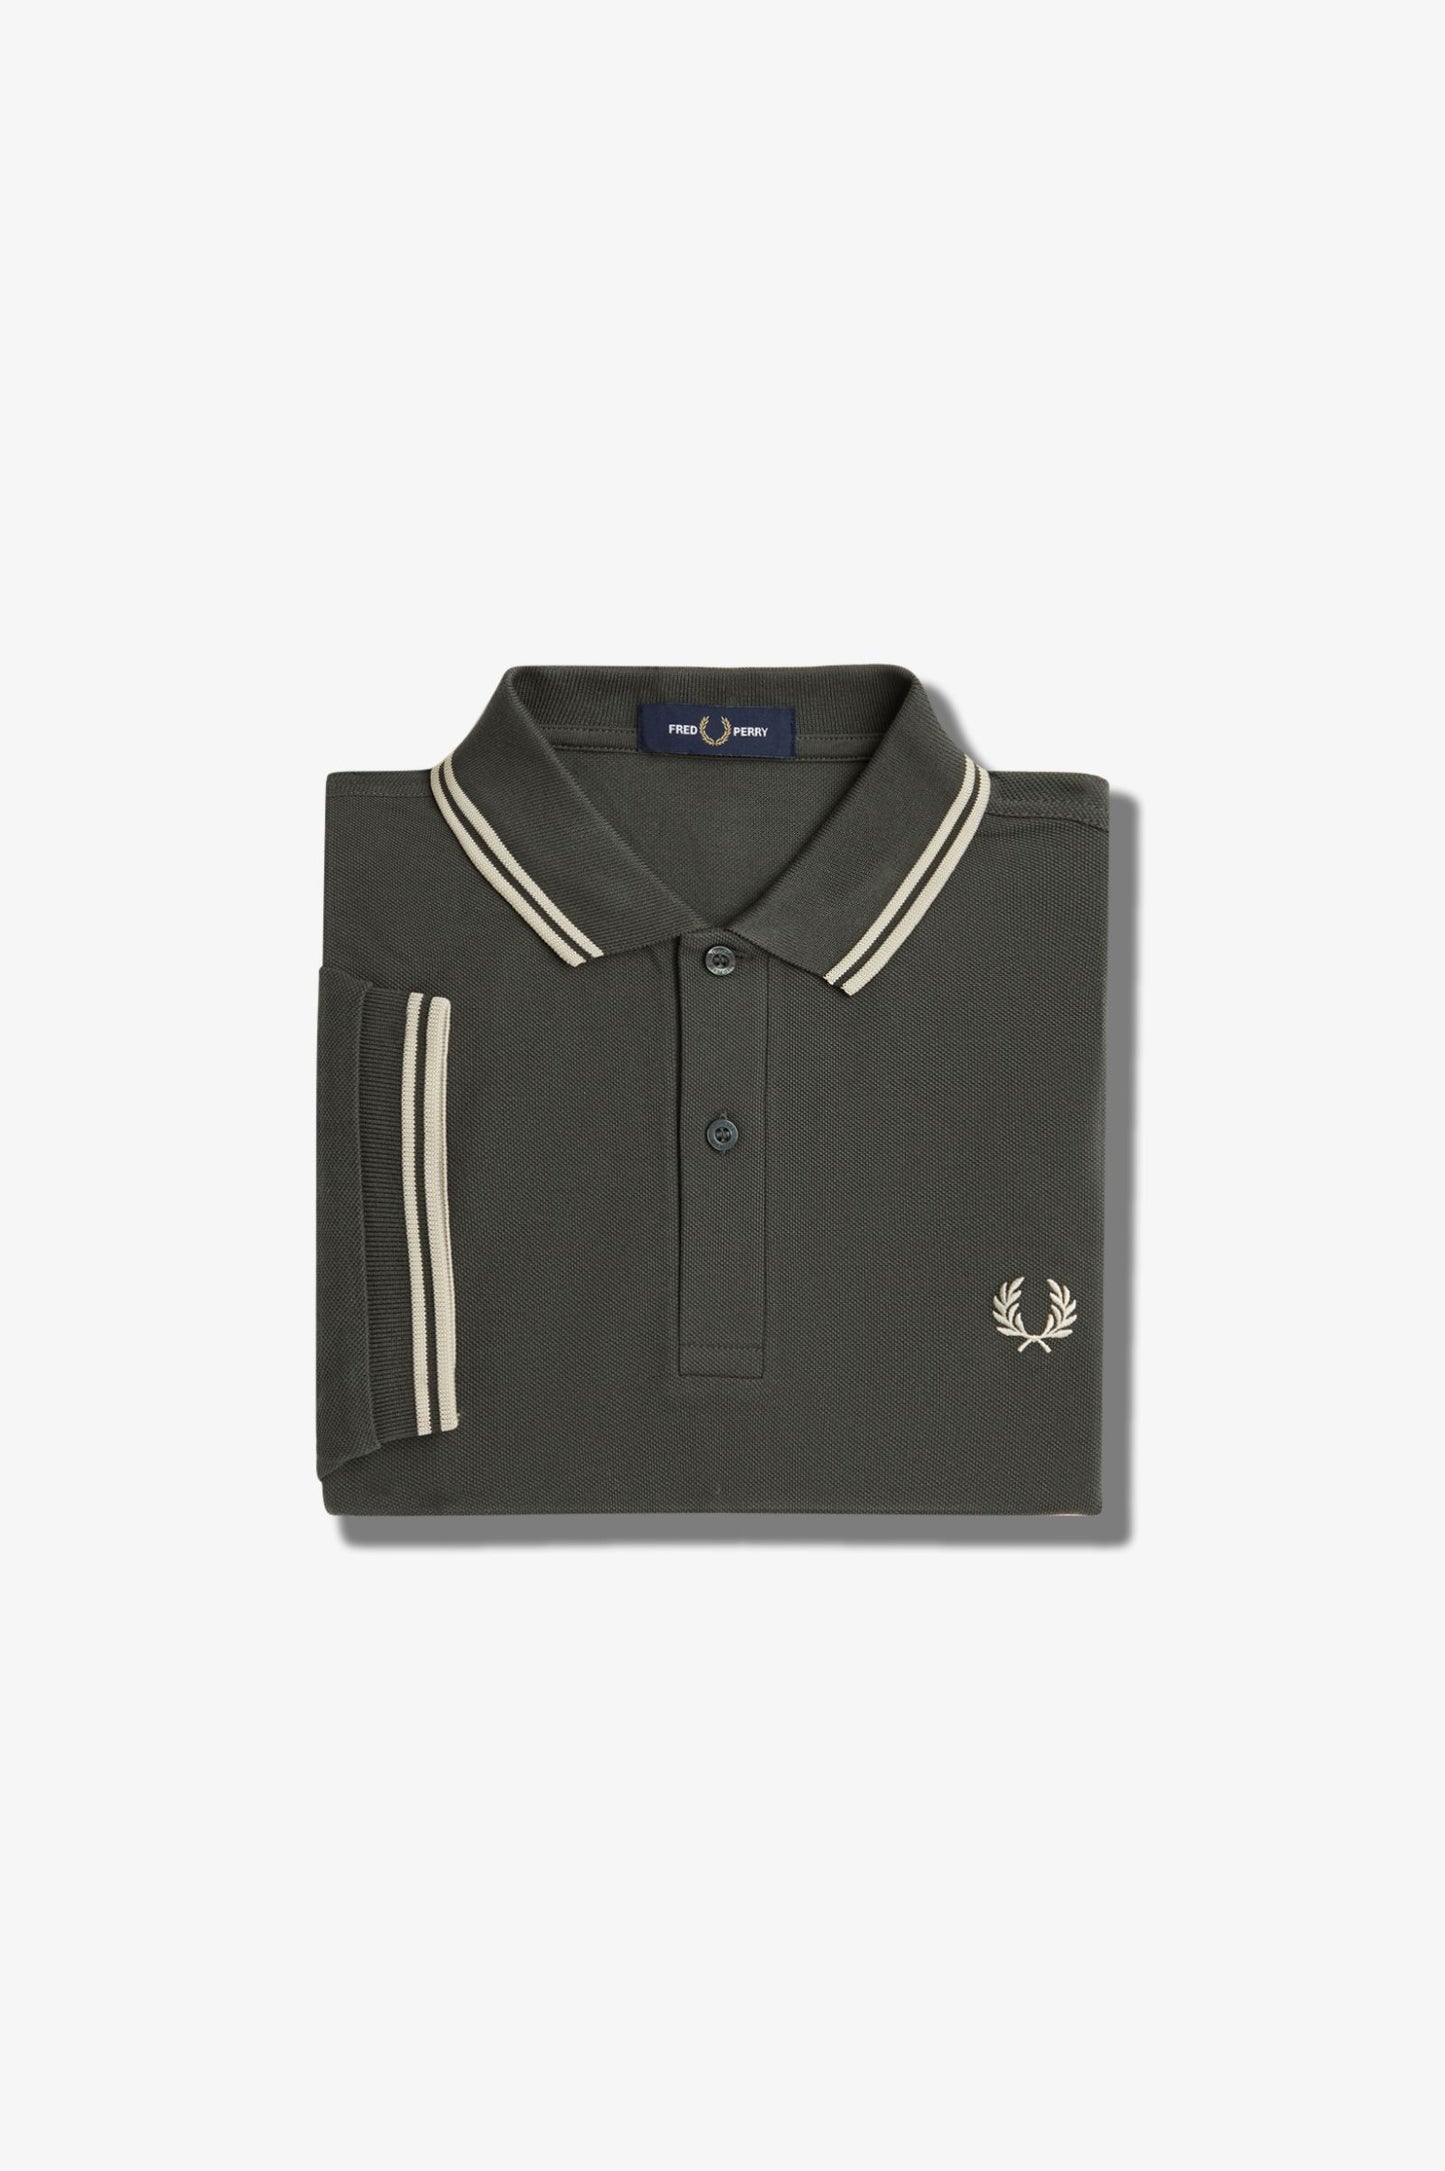 Fred Perry Polo M3600 Fieldgreen / Oatmeal